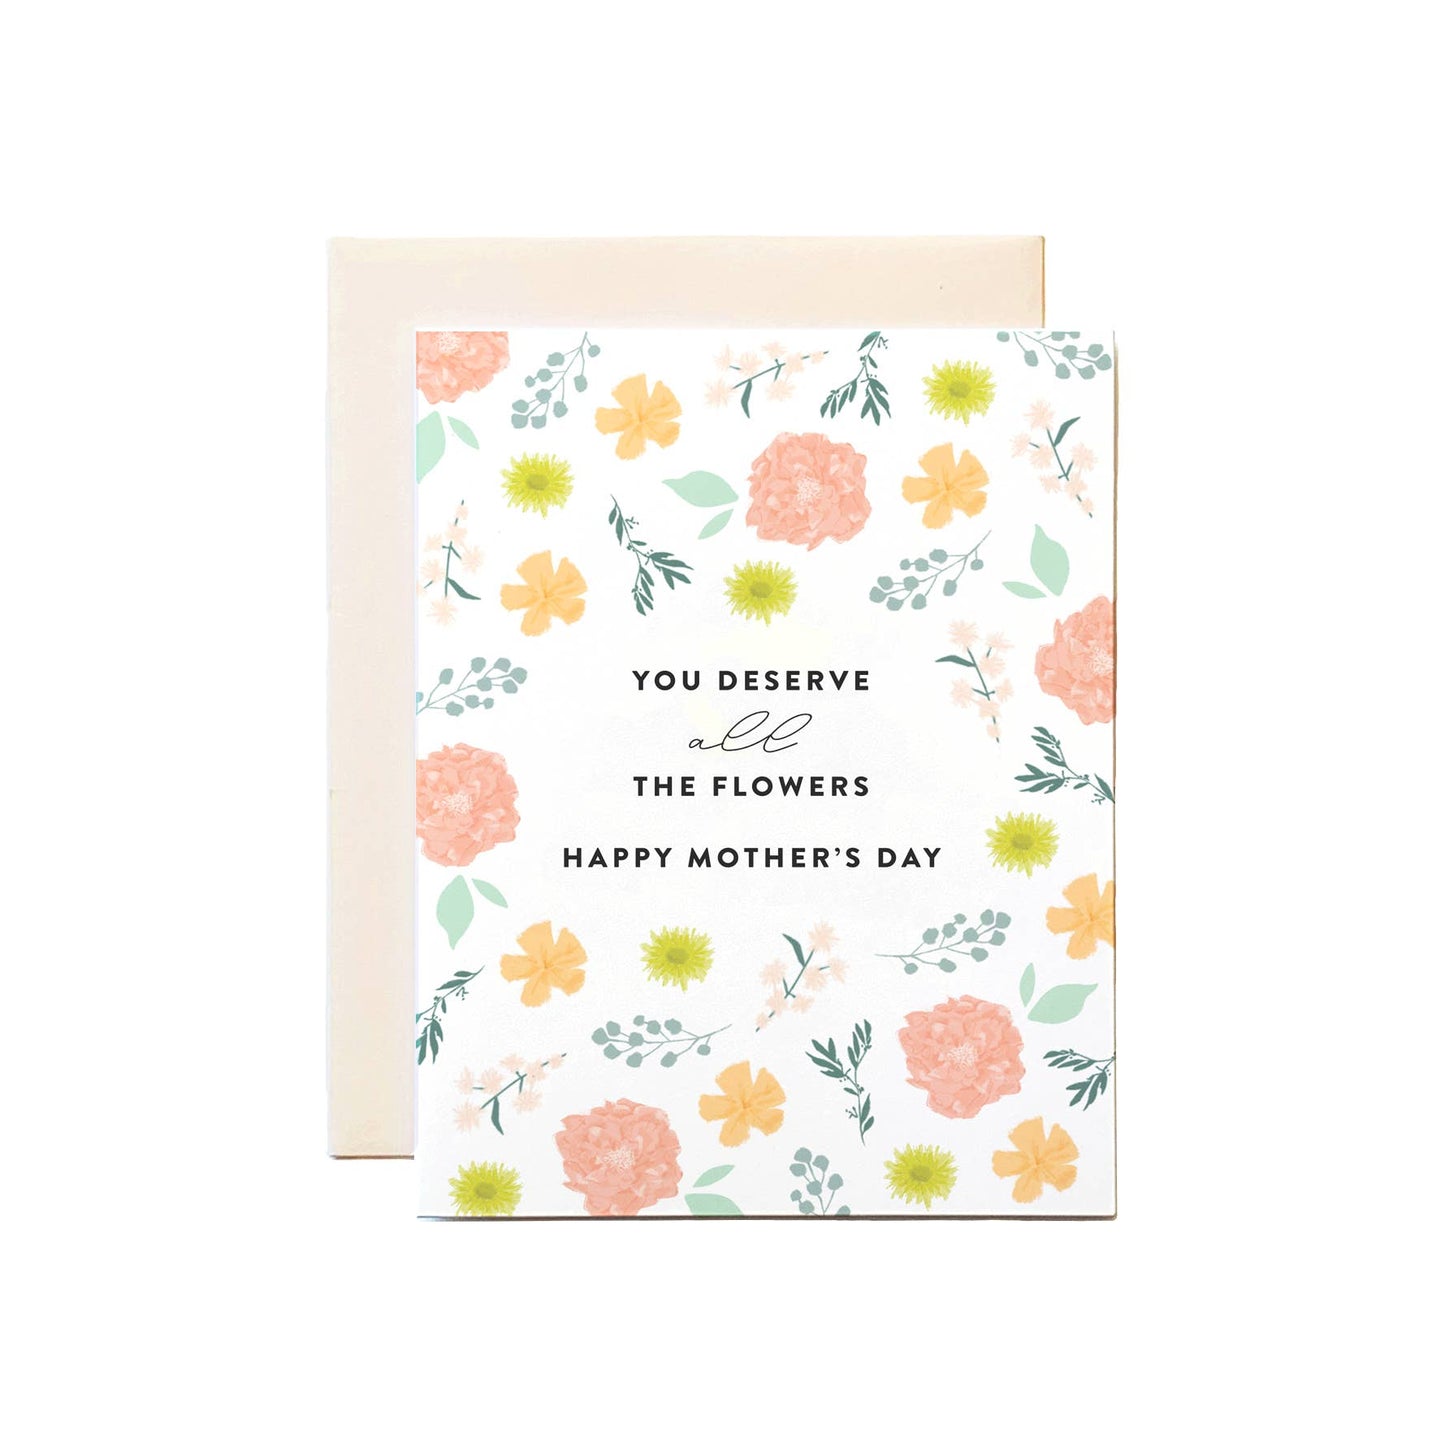 All the Flowers Mother's Day Card